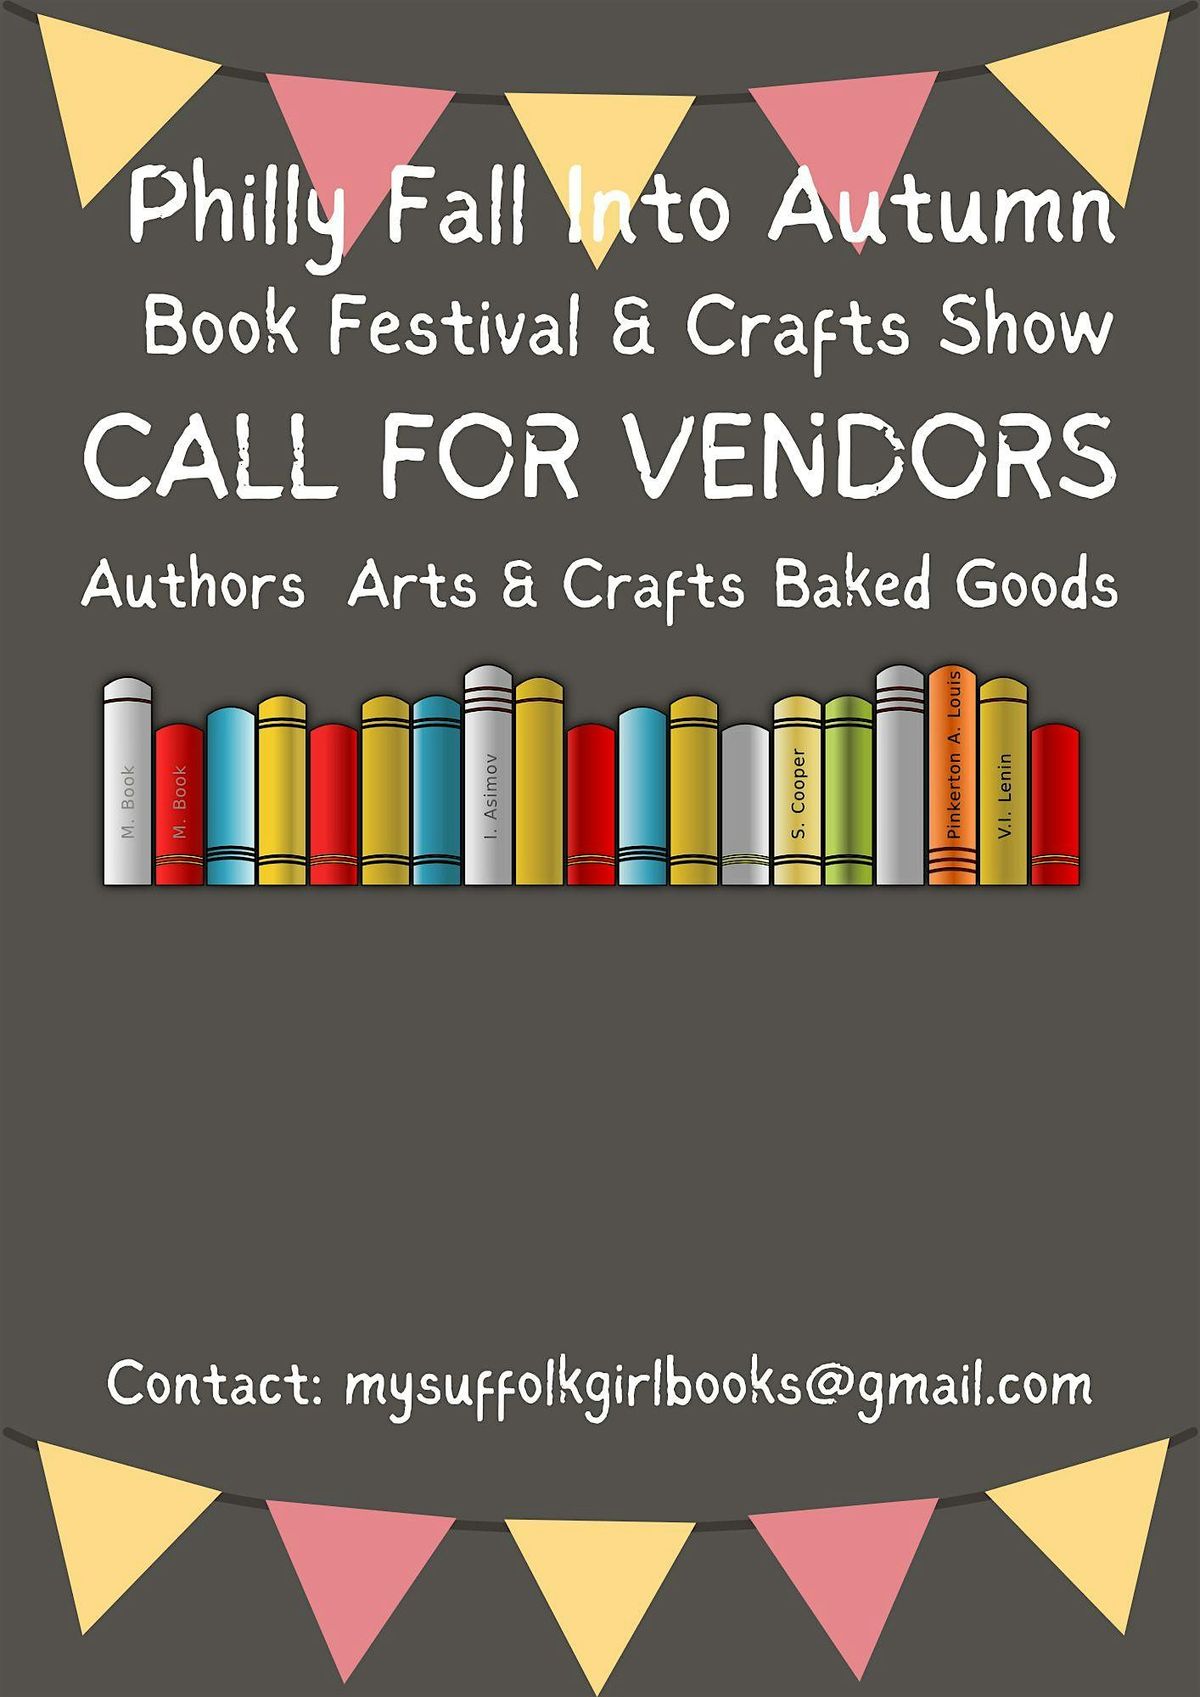 Call For Vendors_Authors*Illustrators*Arts&Crafts*Baked Goods